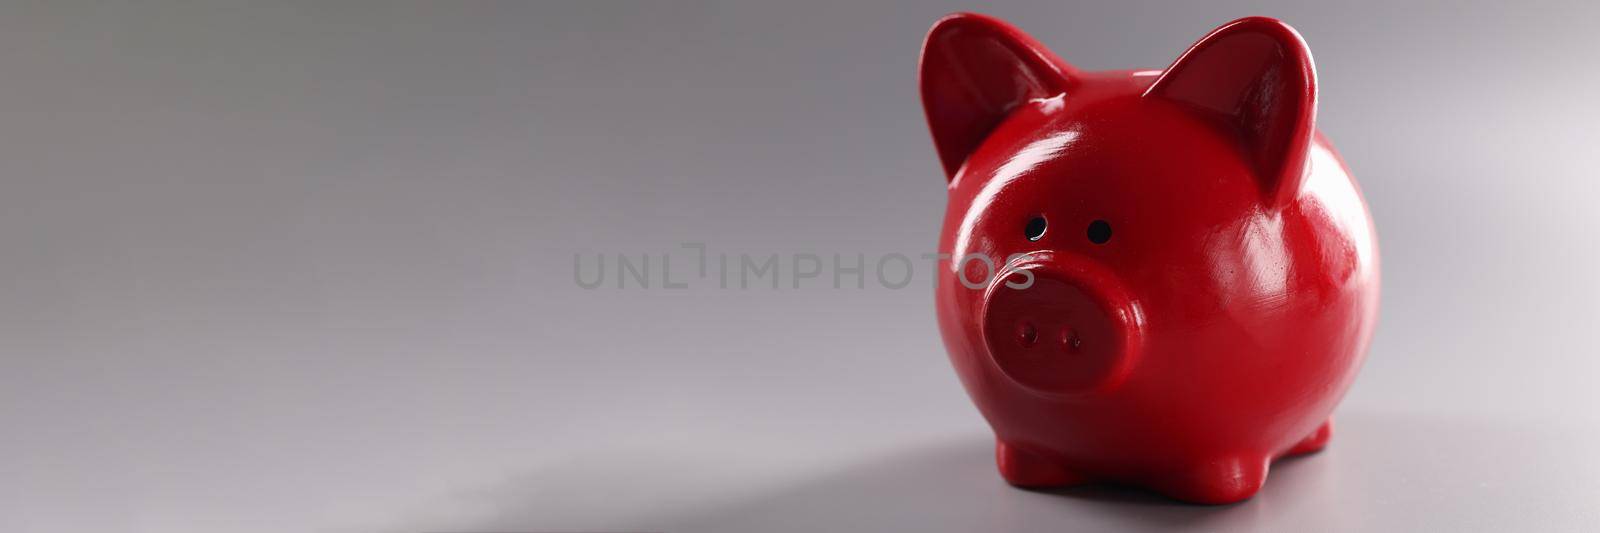 Closeup of red piggy banks for coins on gray background by kuprevich